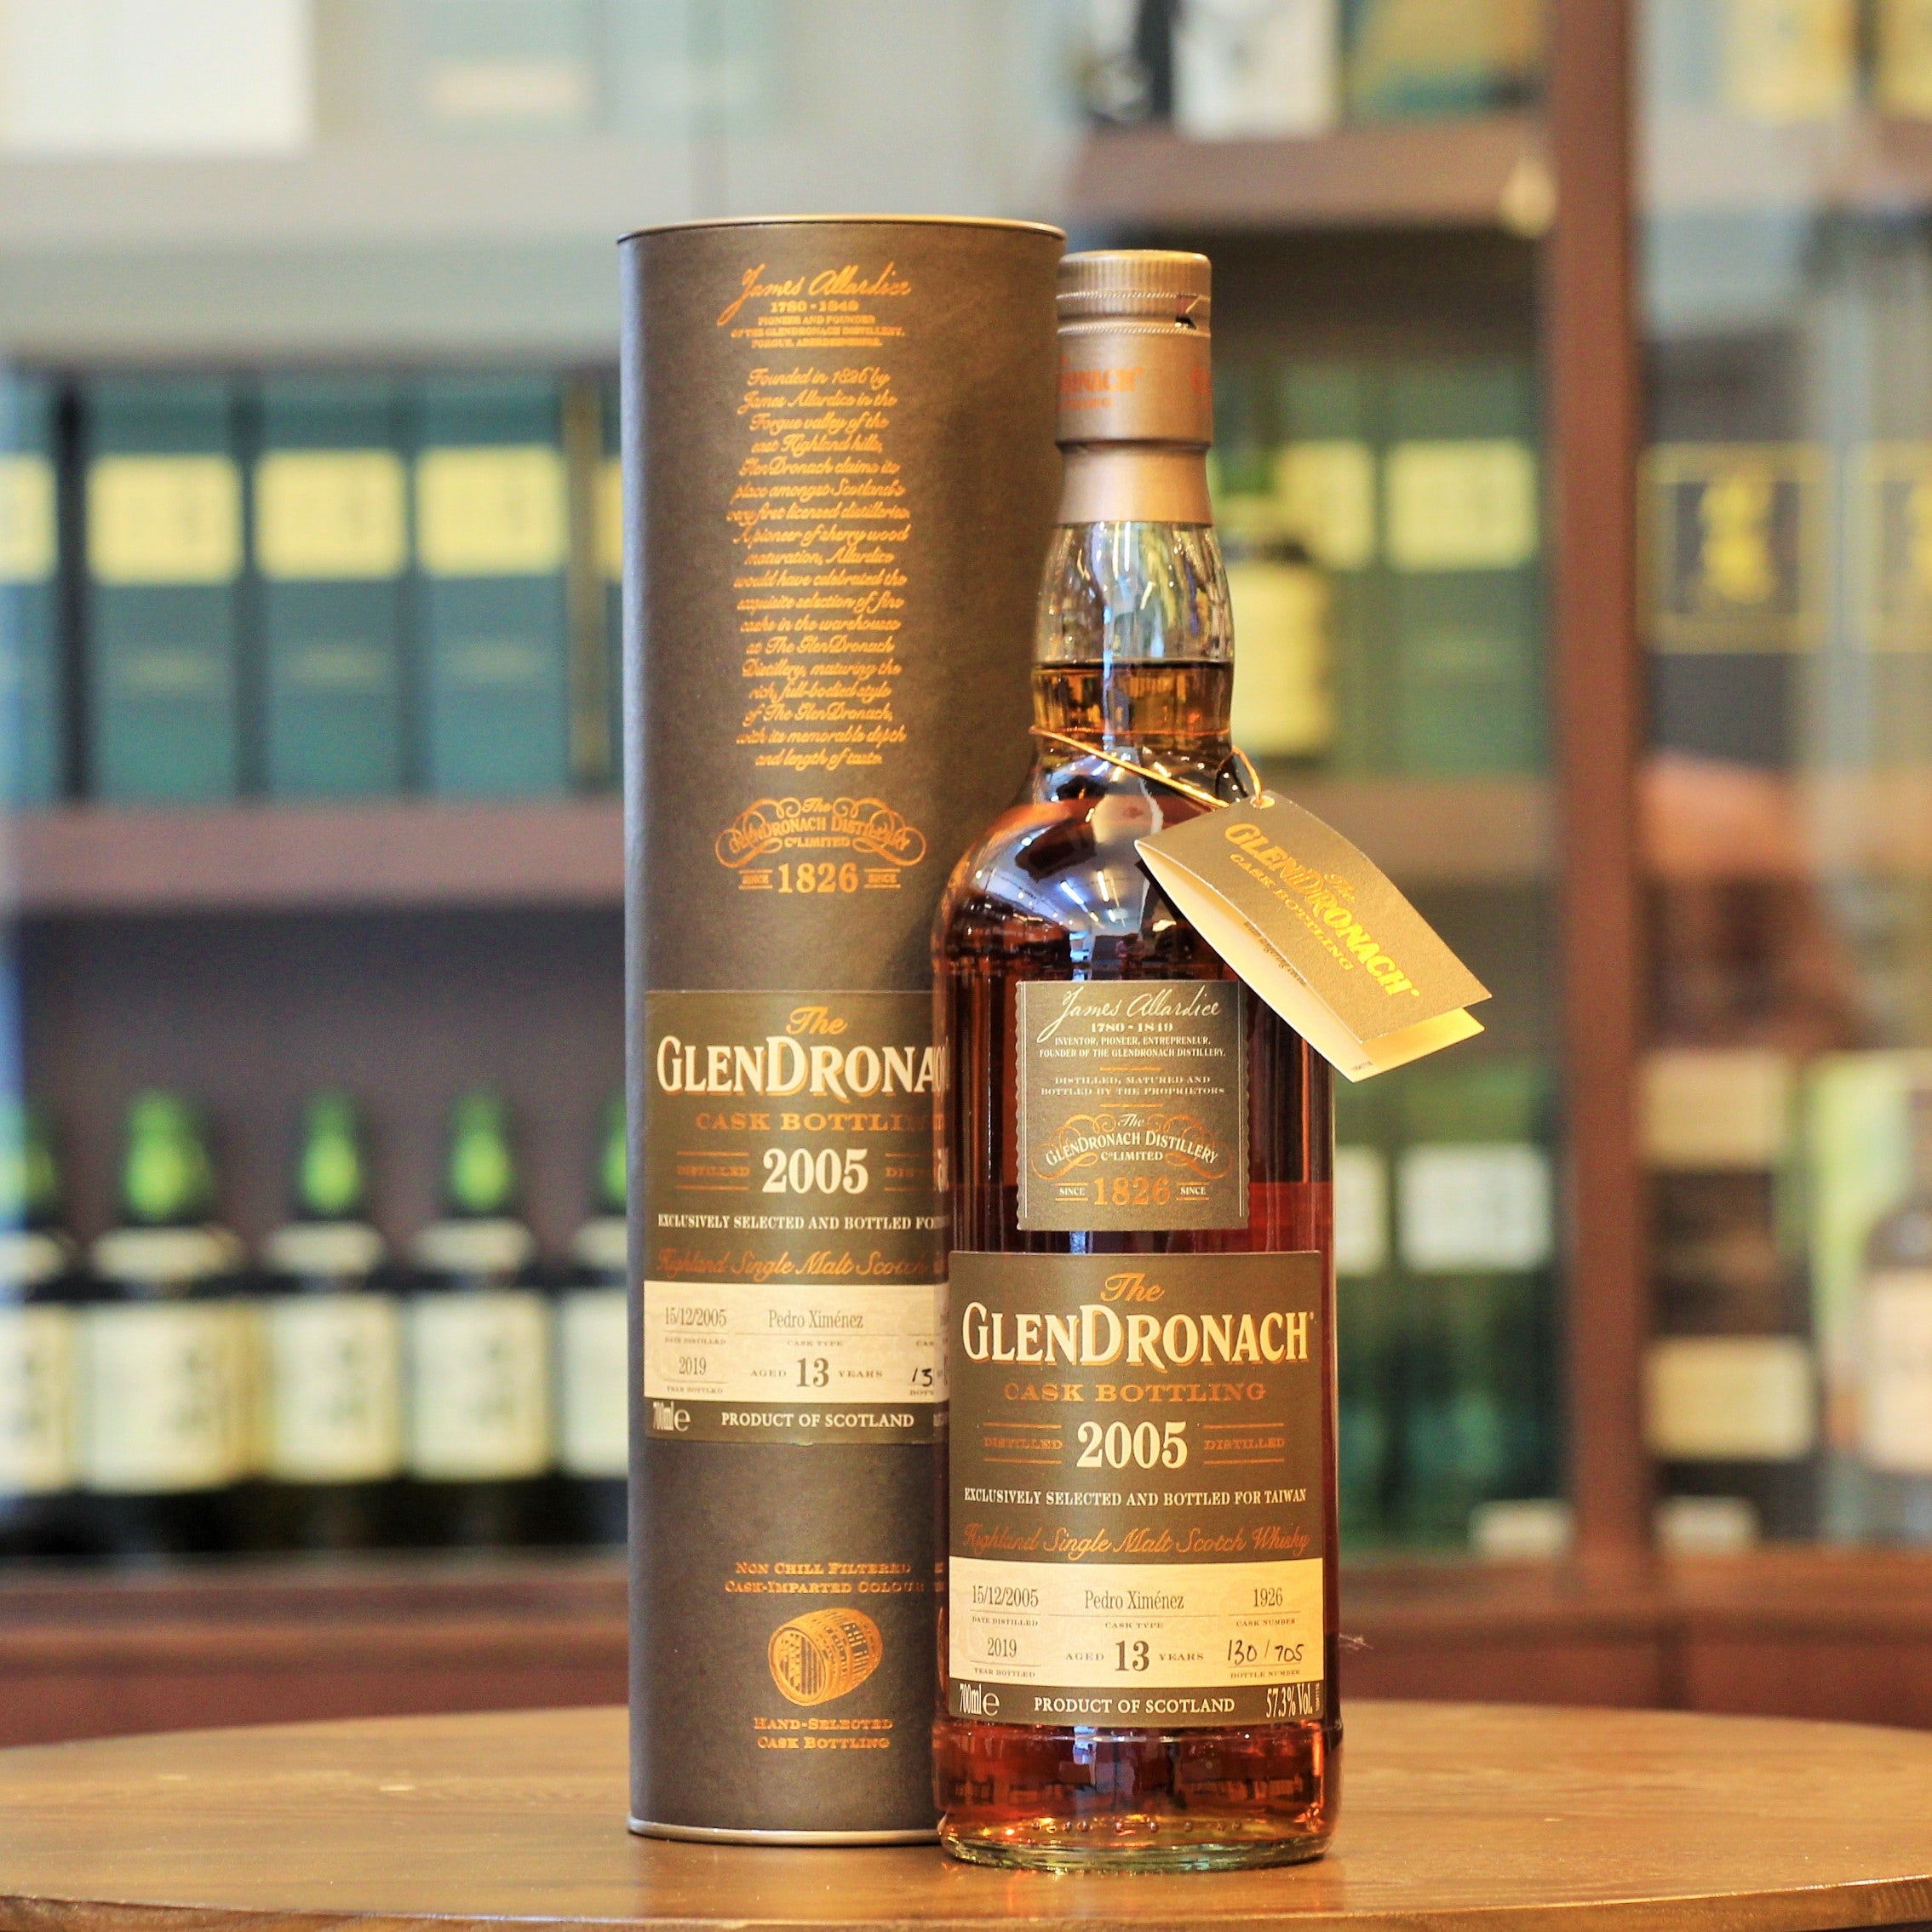 A 2005 Vintage Single Cask #1926 special bottling from the GlenDronach distillery, matured for 13 years in a Pedro Ximenez Sherry Cask for the Taiwan market and bottled at an impressive 57.3% ABV.